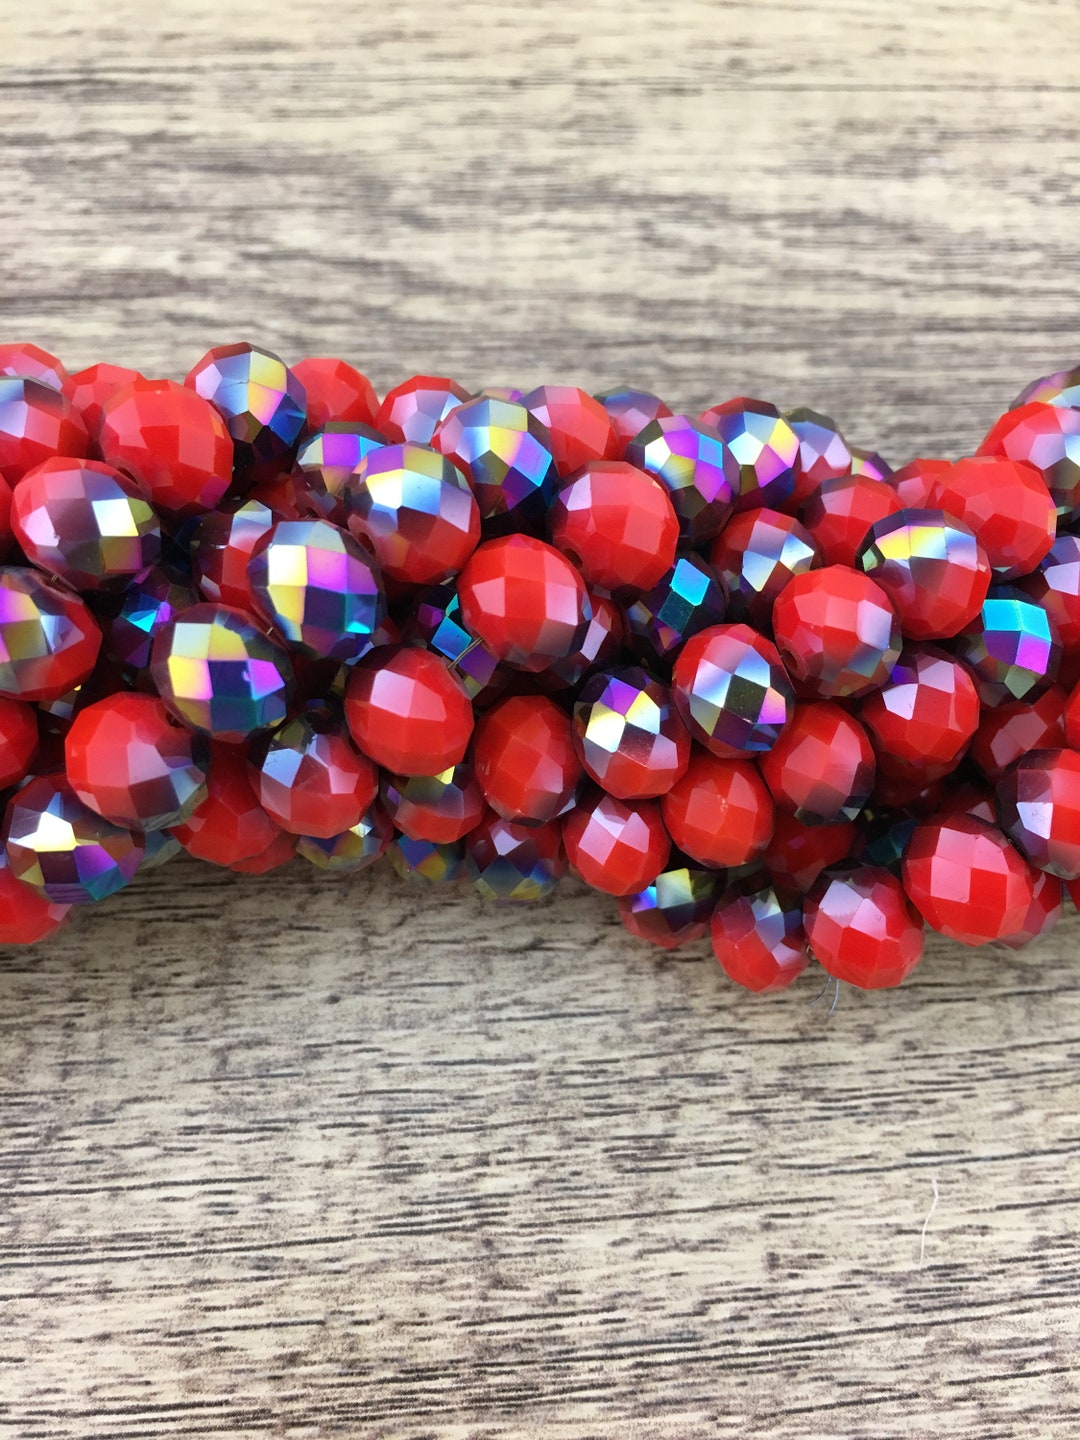 10x6mm Flat Round Glass Beads With Big Hole 2.5mm Hole Size 30 Pieces  Abacus Shape Beads Rondelle Seed Beads Donut Seed Beads 